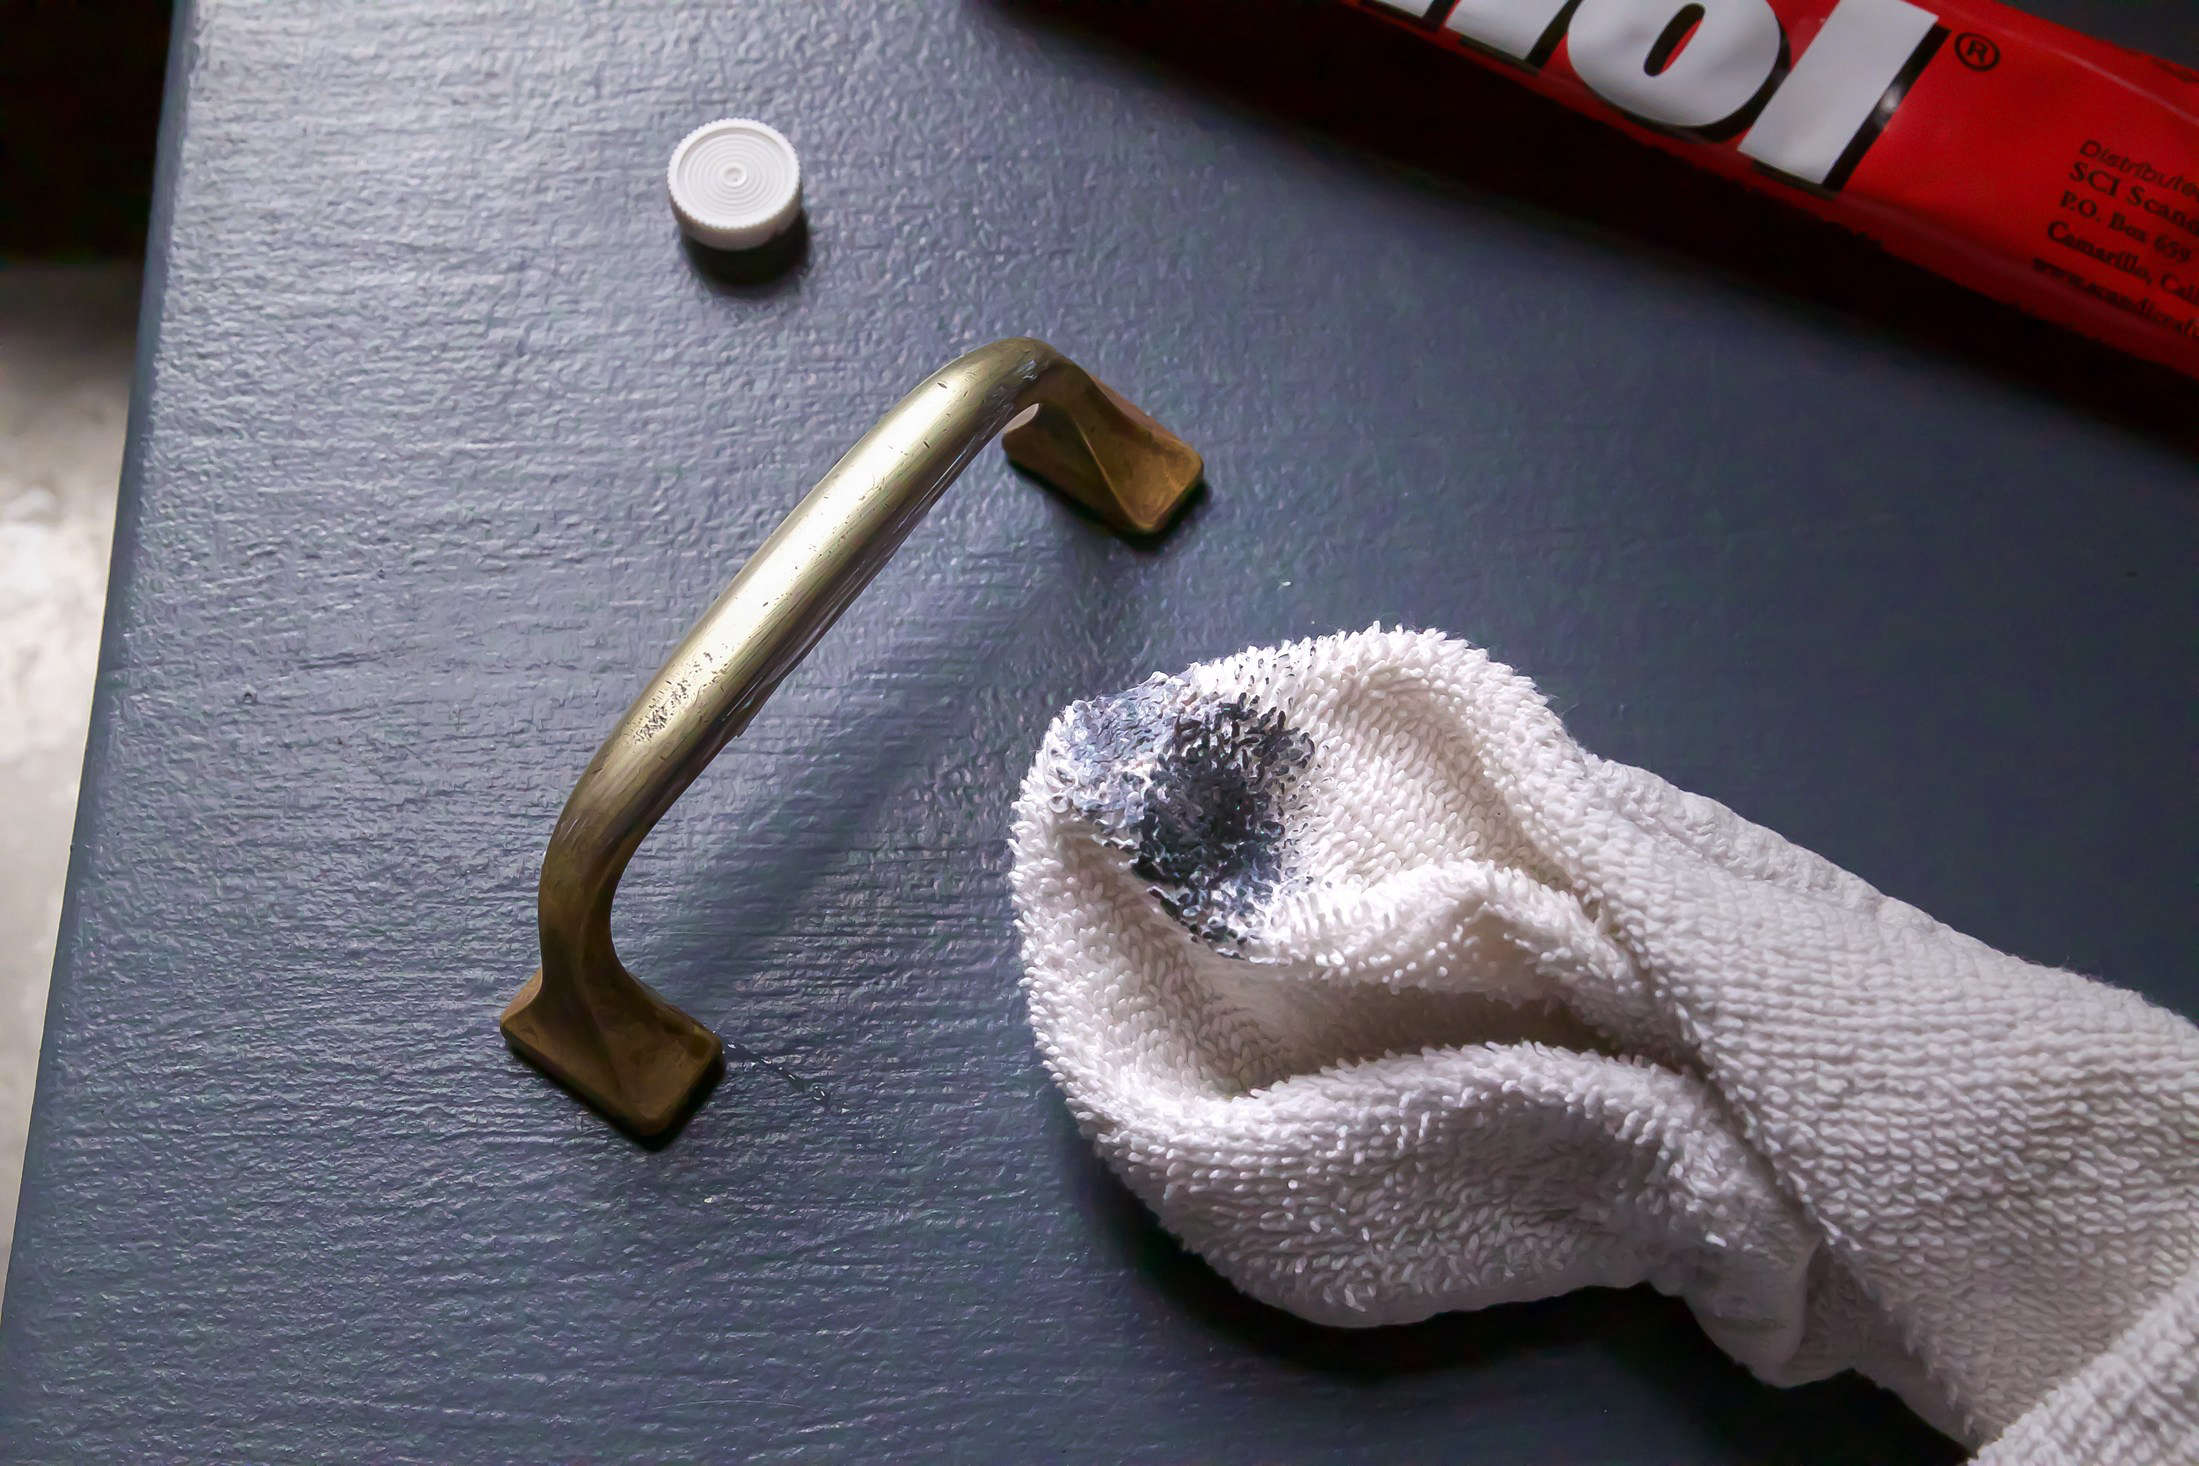 How to clean brass Hardware Naturally - Let's Paint Furniture!